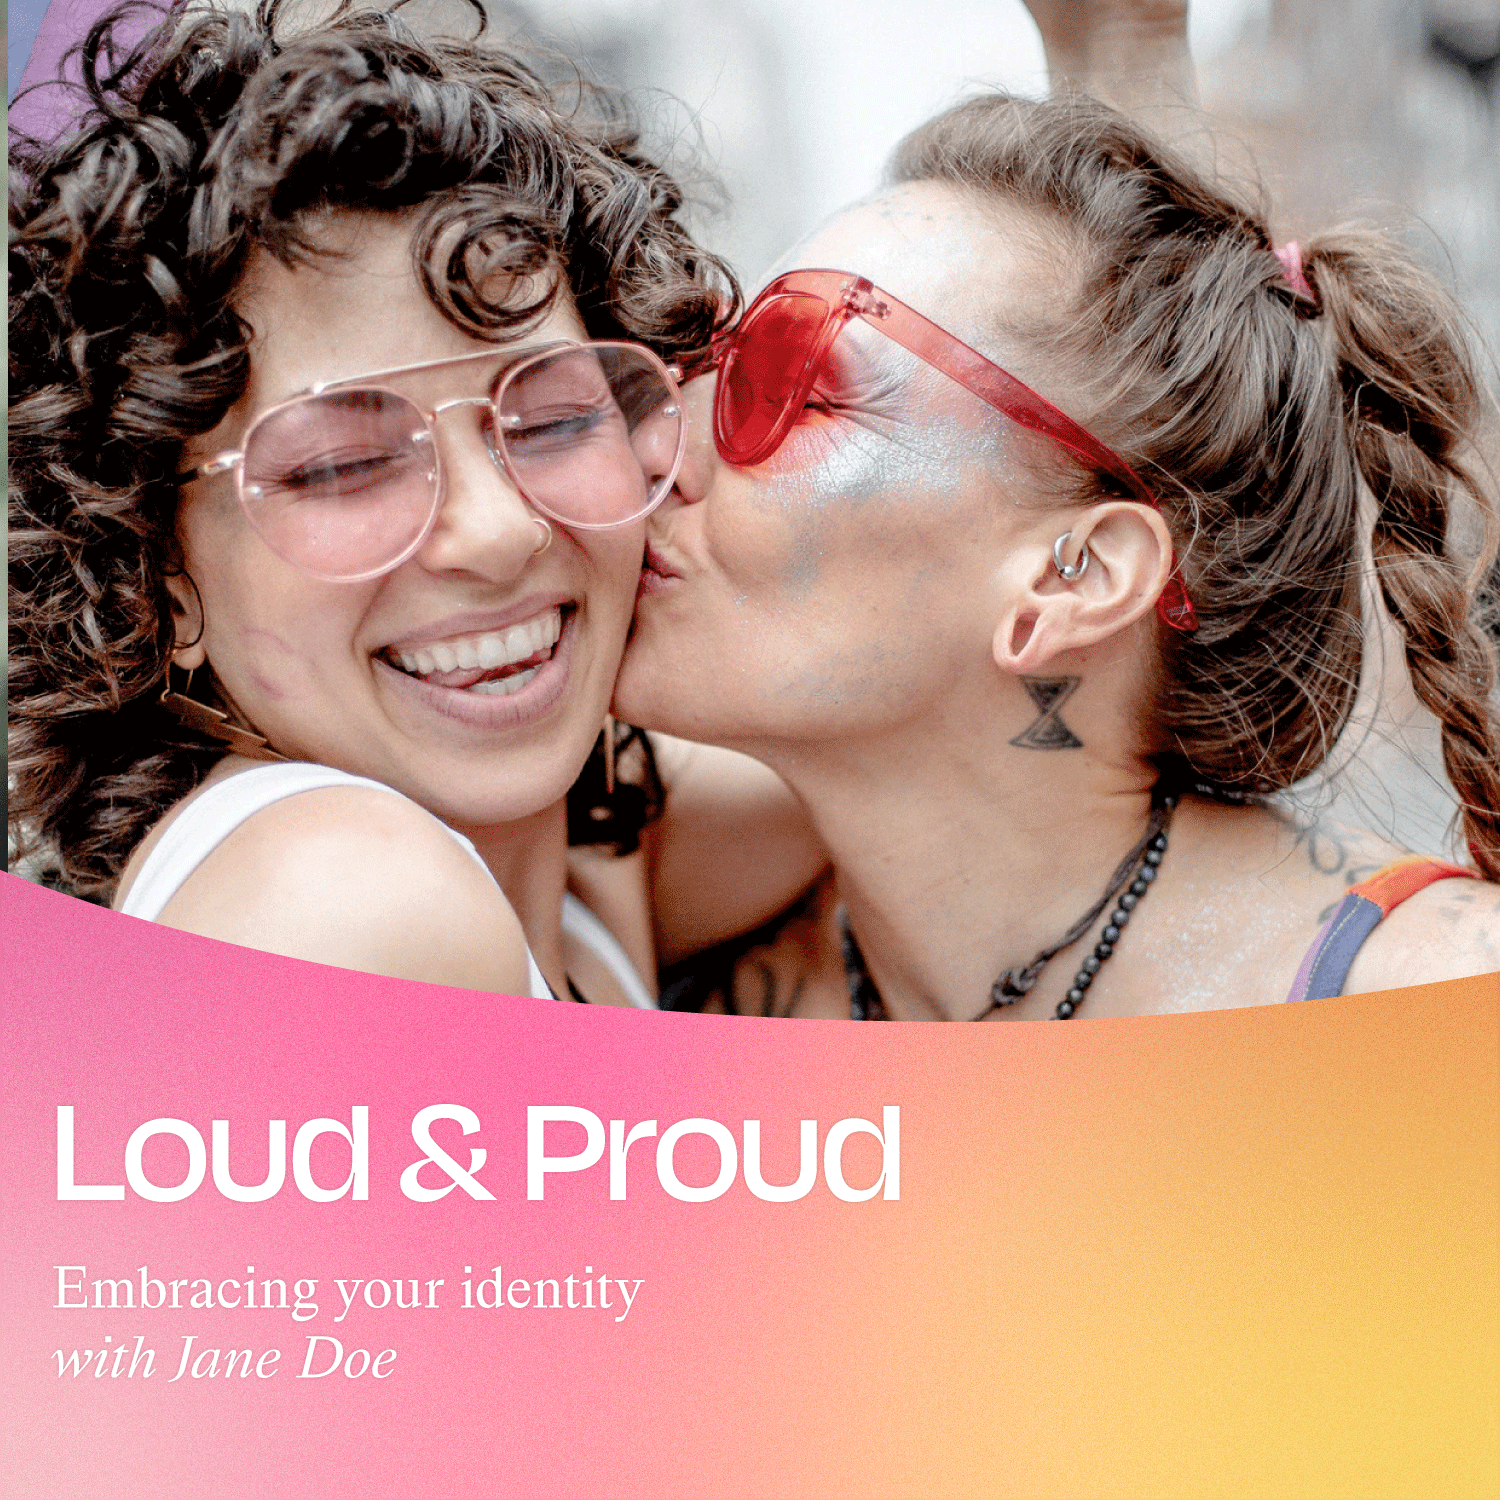 An example of an Instagram post using the lesbian pride flag template.